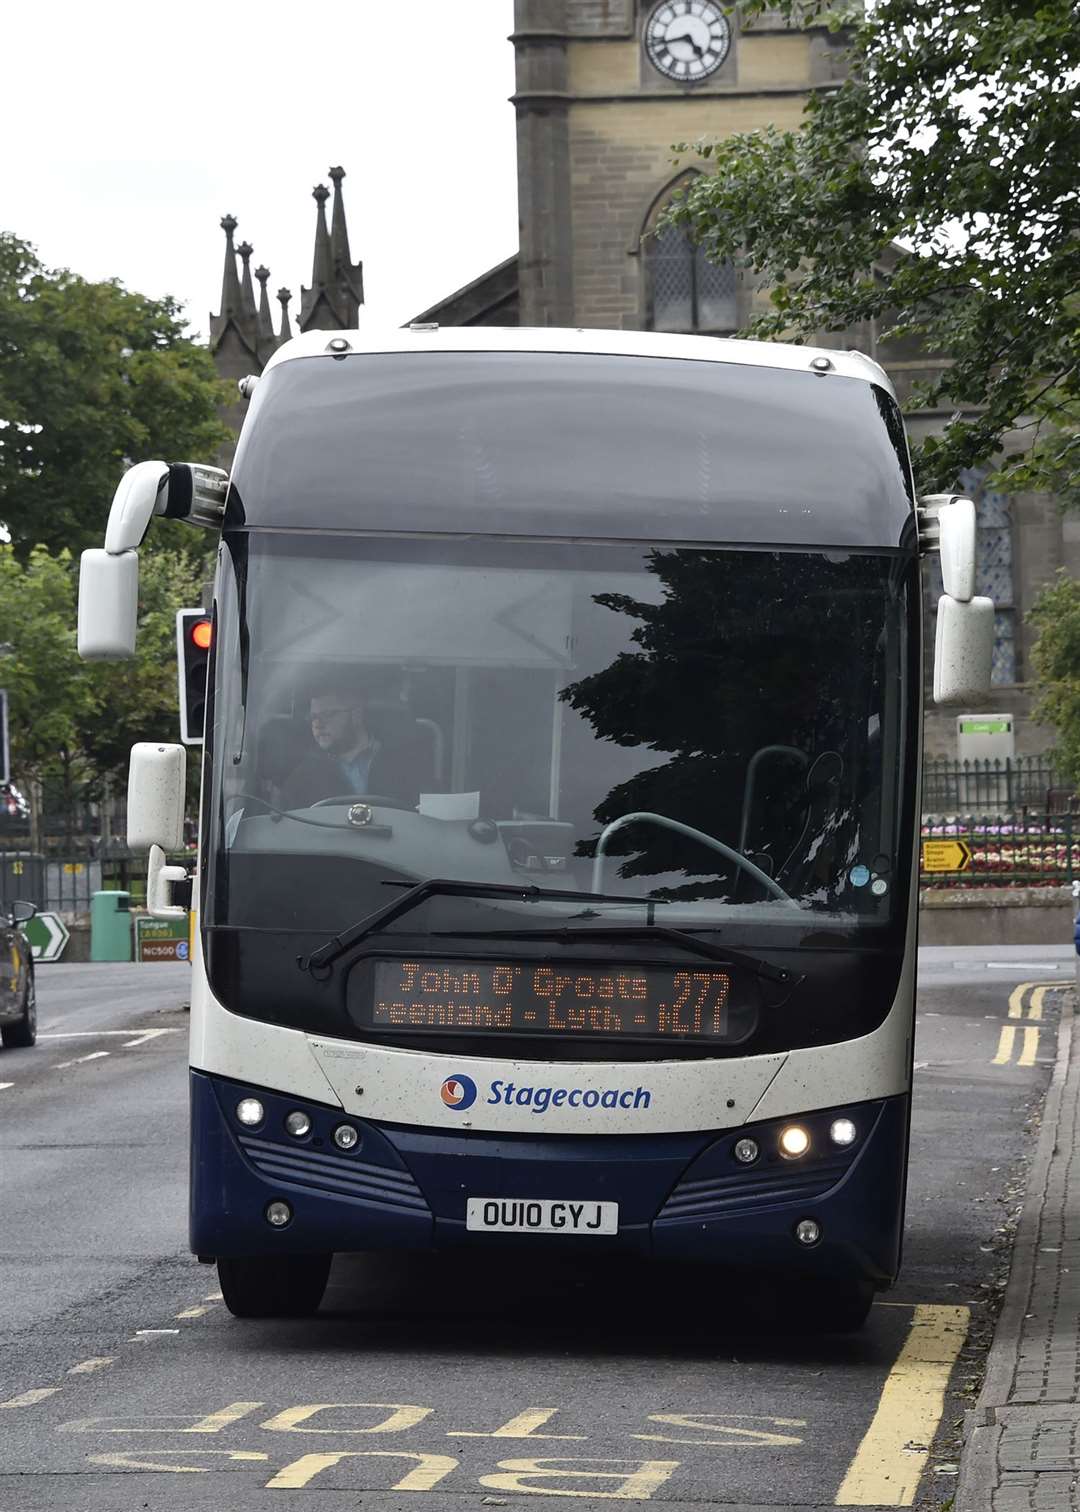 If industrial action is agreed, Stagecoach Group bus services in the Highlands and elsewhere could face disruption between October and January.